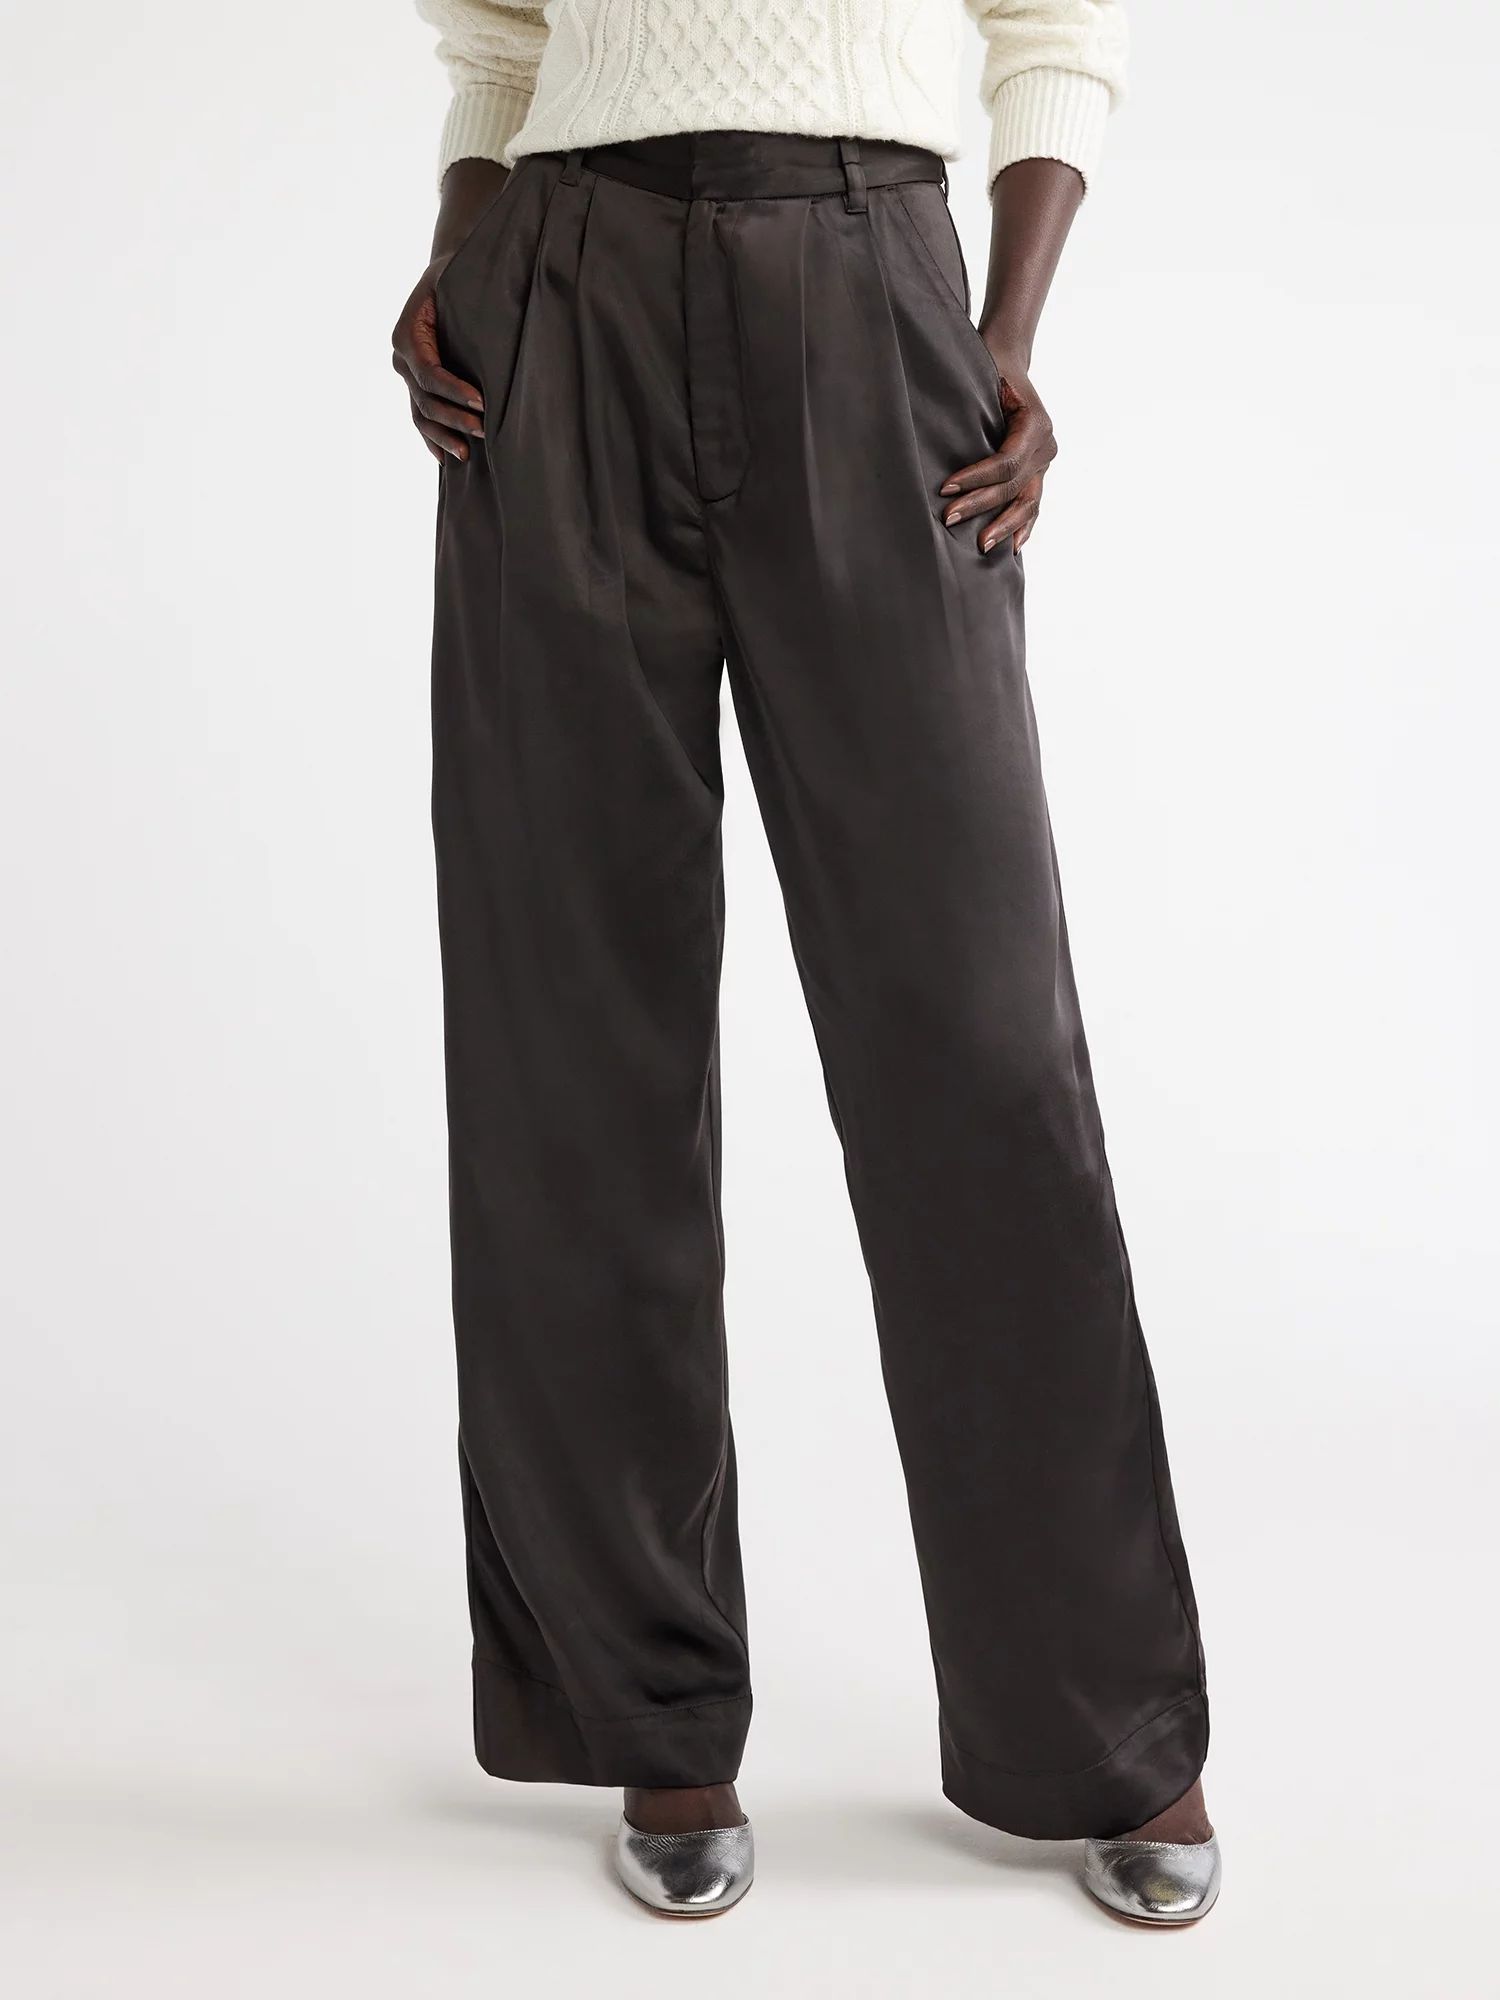 Free Assembly Women's High Rise Pleated Satin Trousers, 31” Inseam, Sizes 0-20 | Walmart (US)